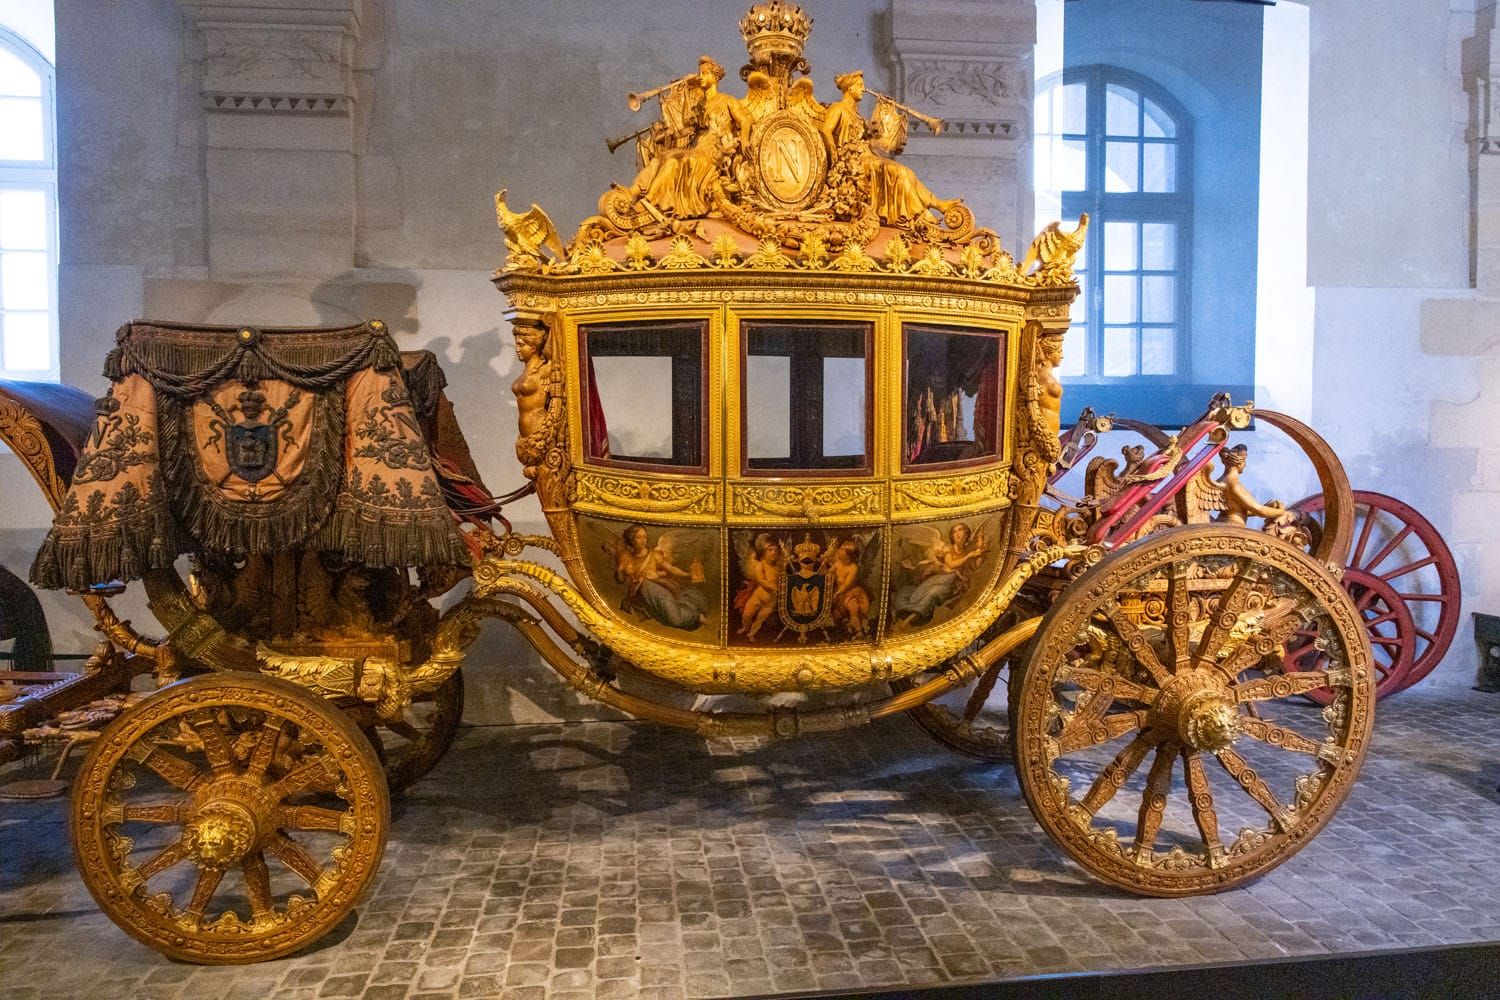 Gallery of Coaches Versailles | How to Visit Versailles